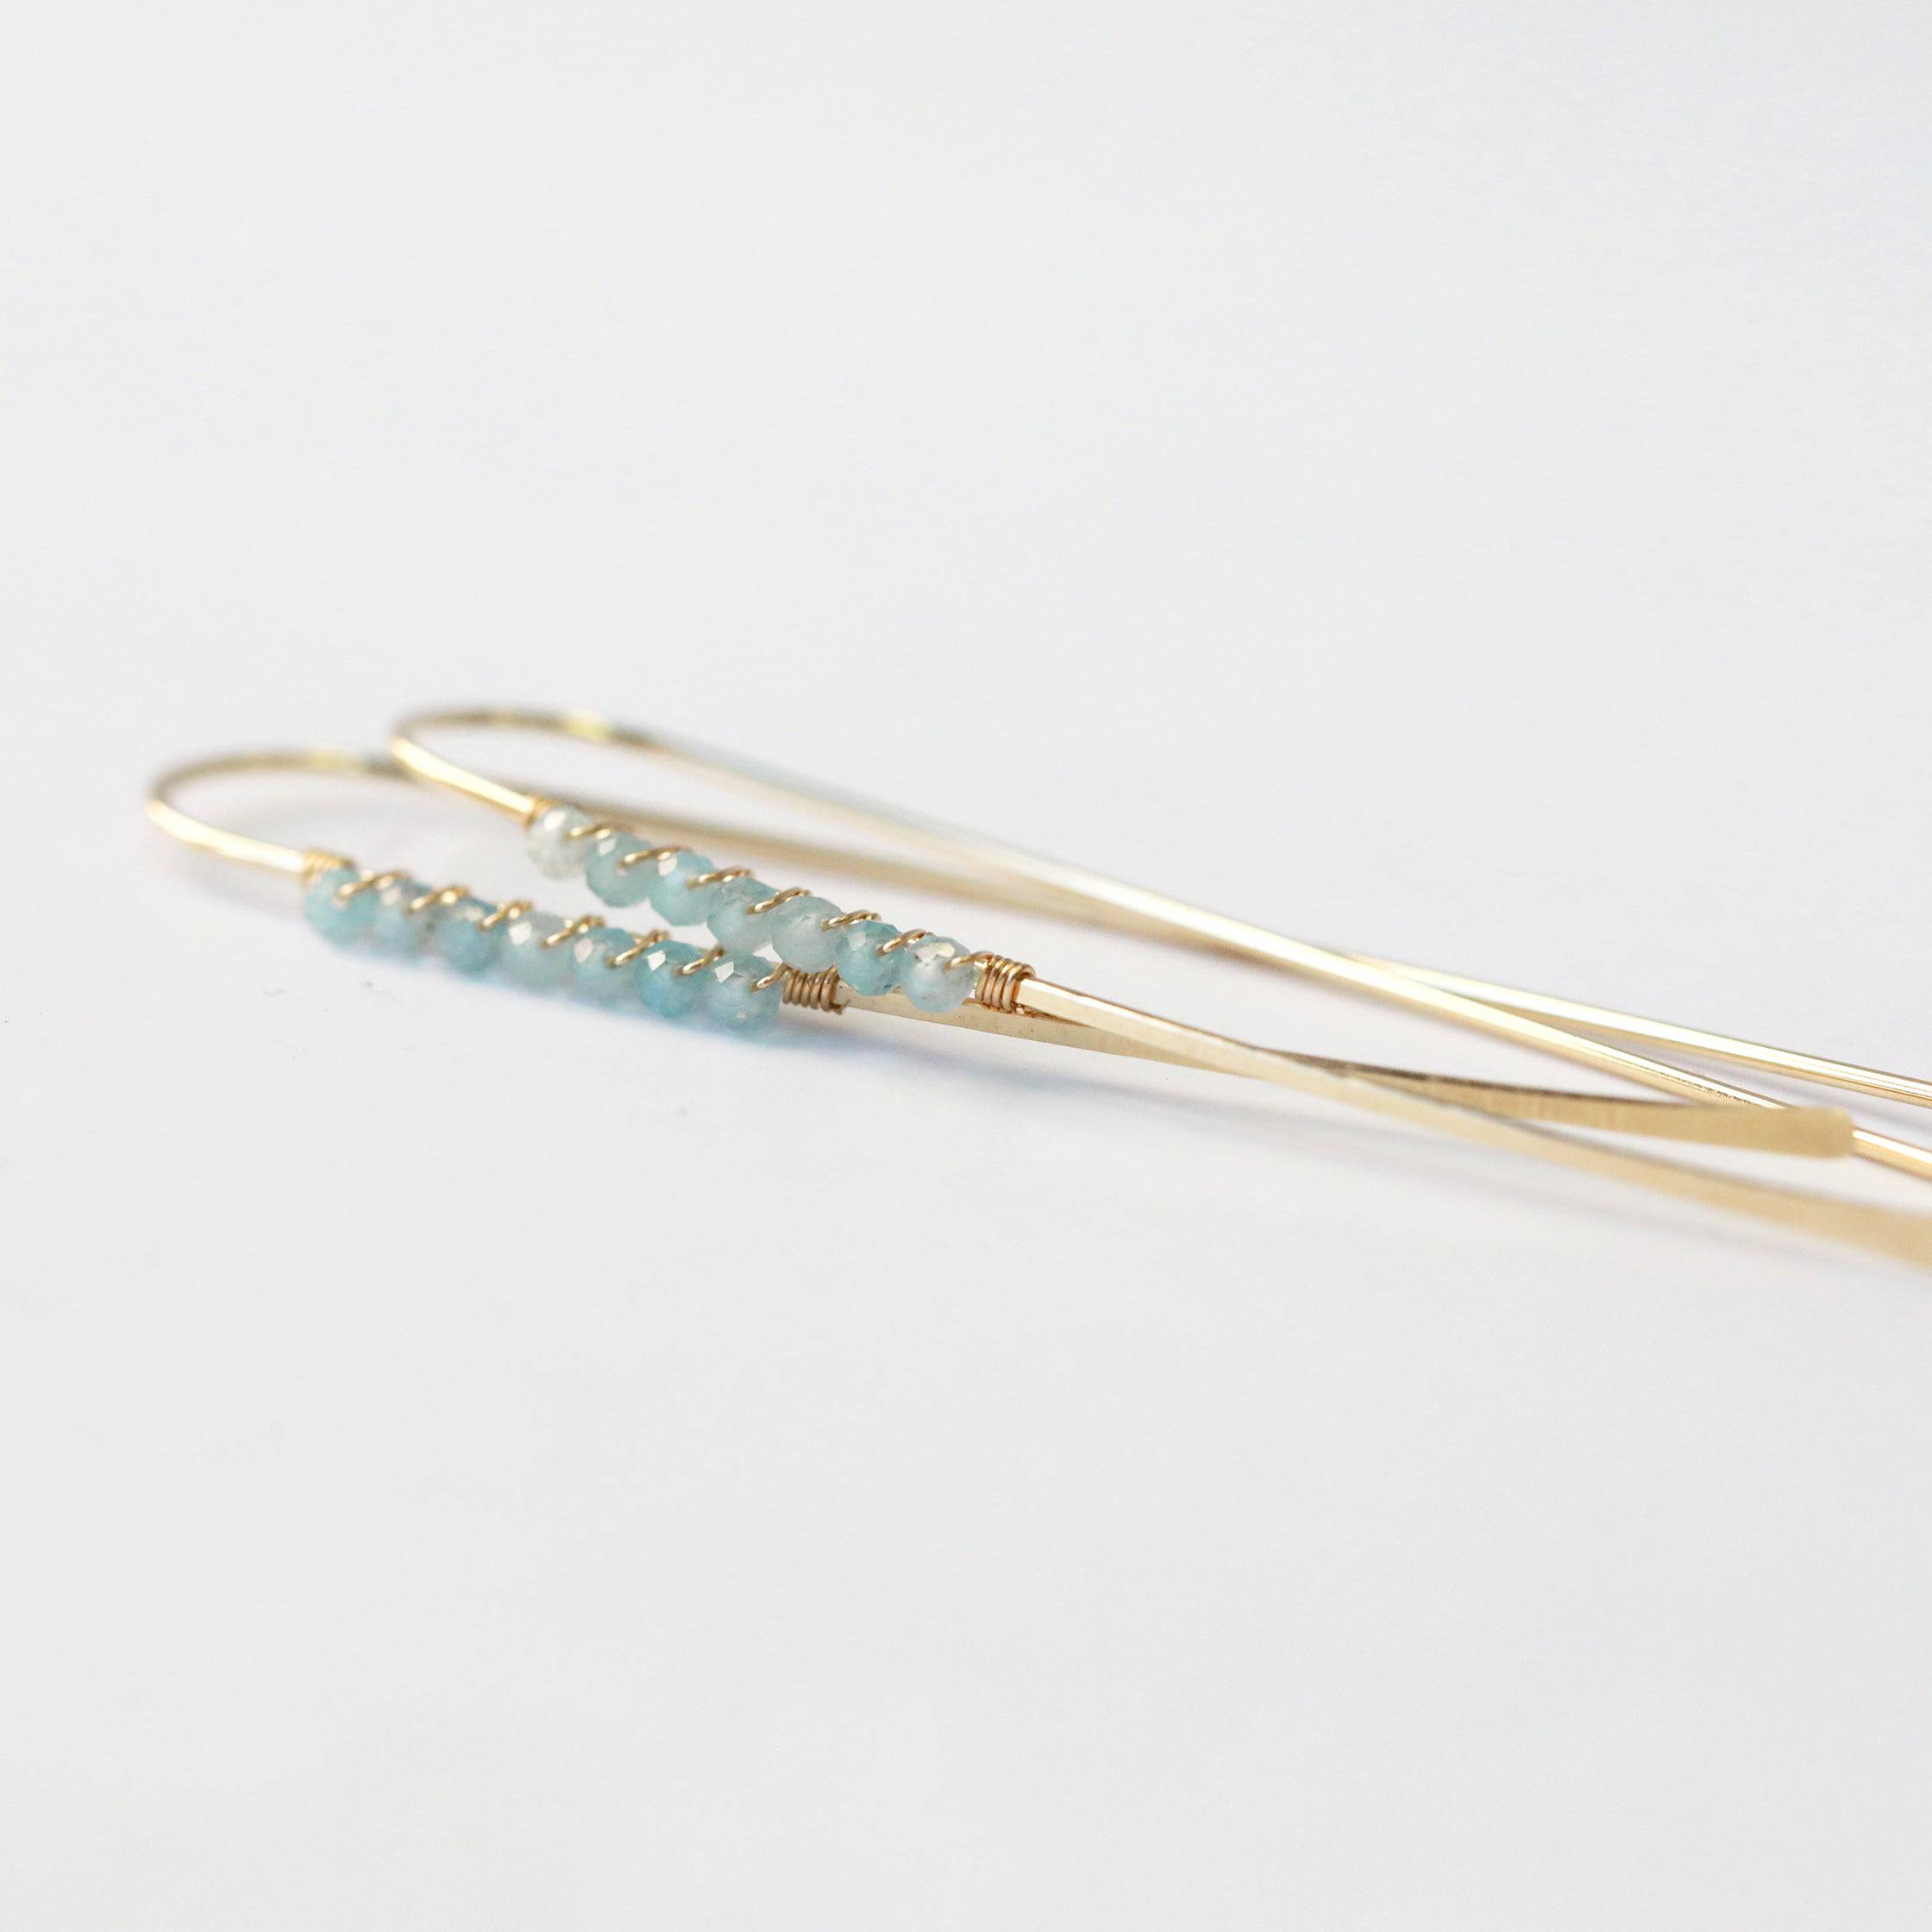 Aquamarine Threader Earrings - The Gilded Witch